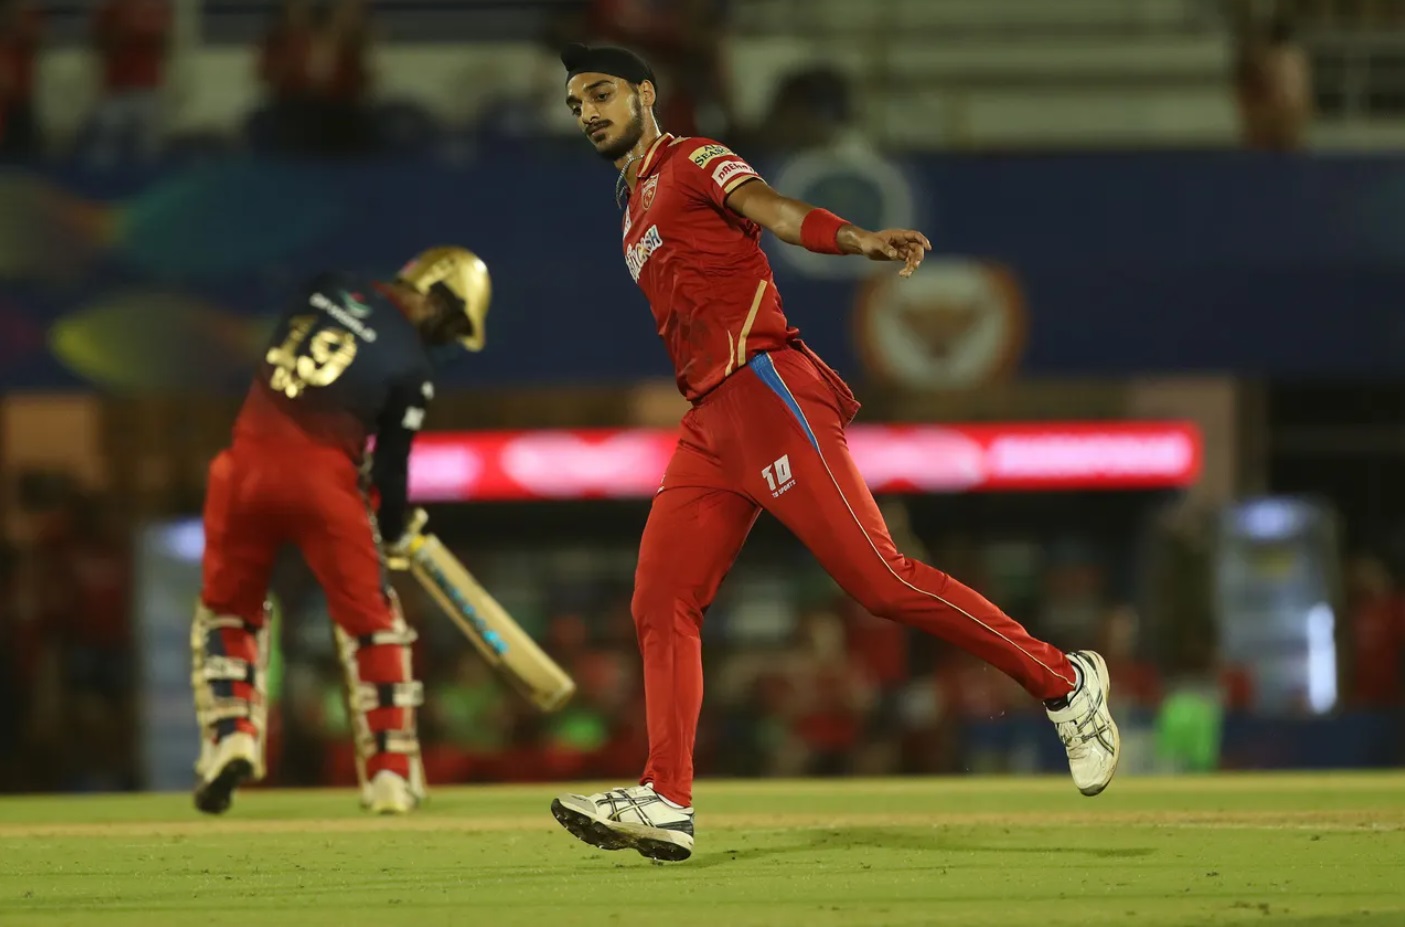 IPL 2022, RCB vs PBKS | 'Confident' Arshdeep Singh is one of our leaders, says Mayank Agarwal